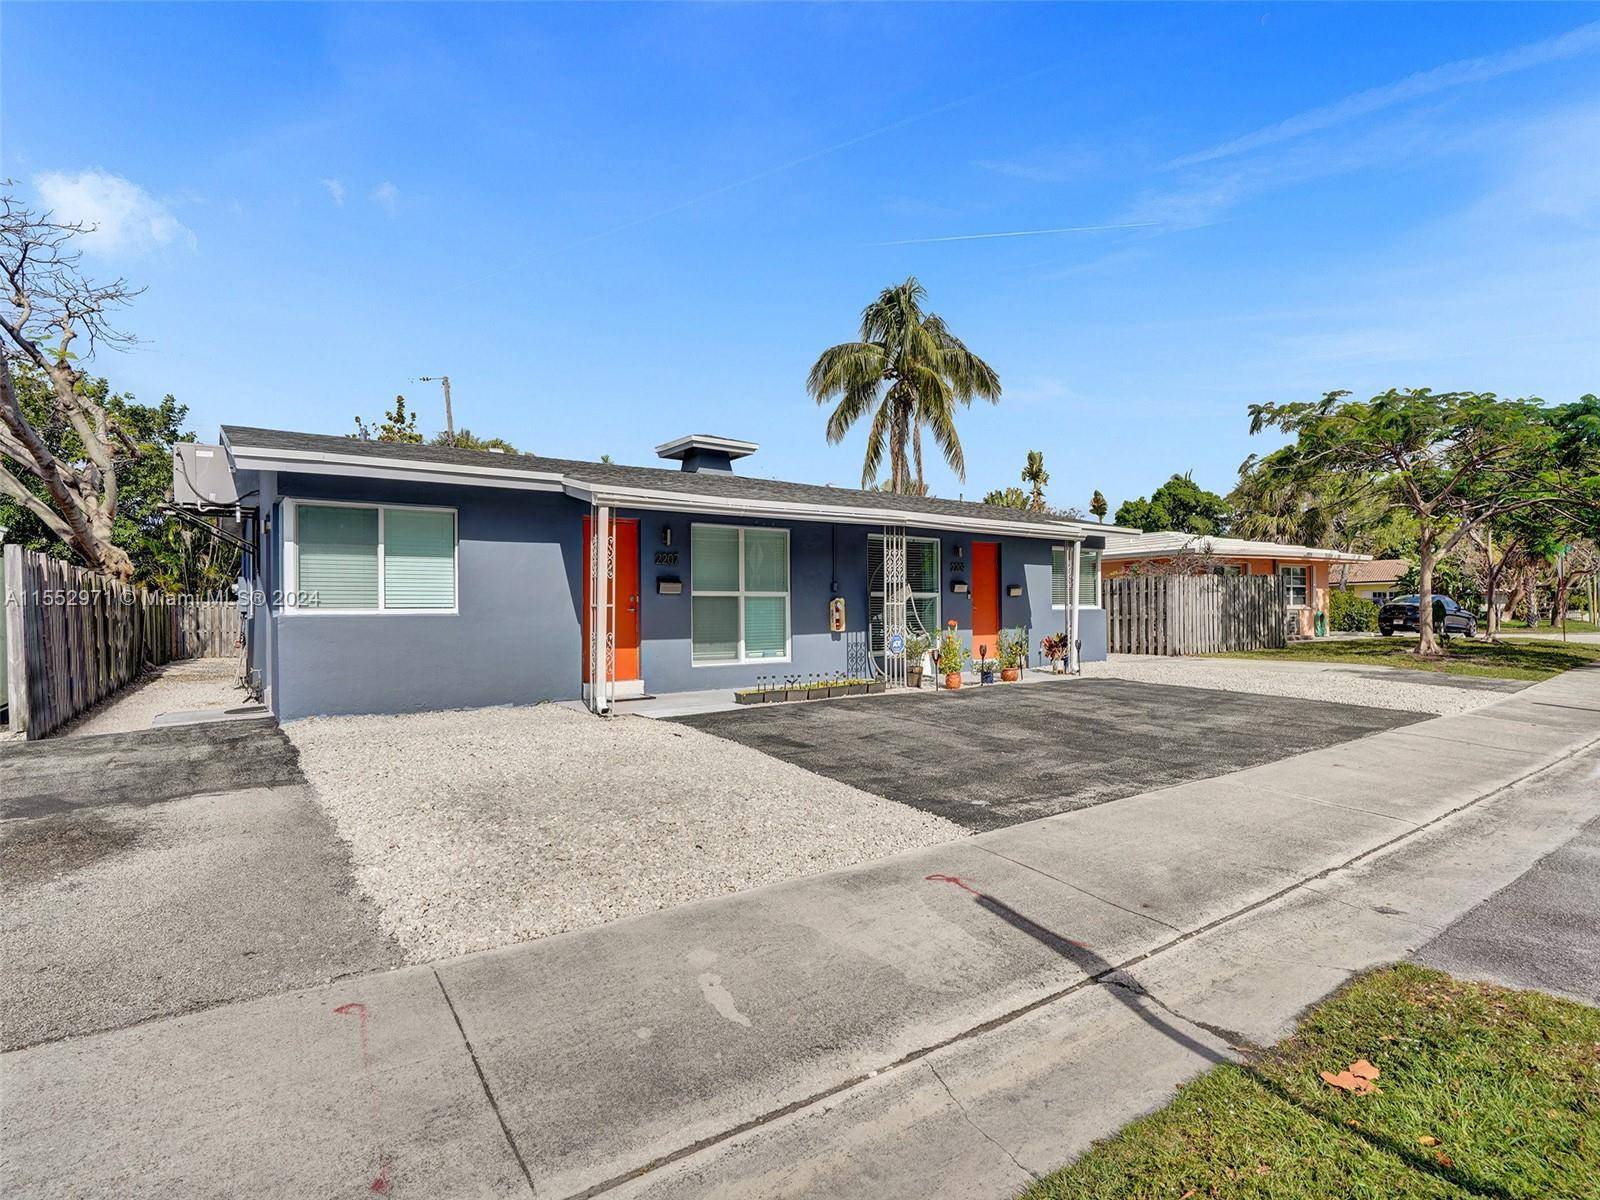 Great opportunity to own this tastefully updated triplex in sought after Wilton Manors.